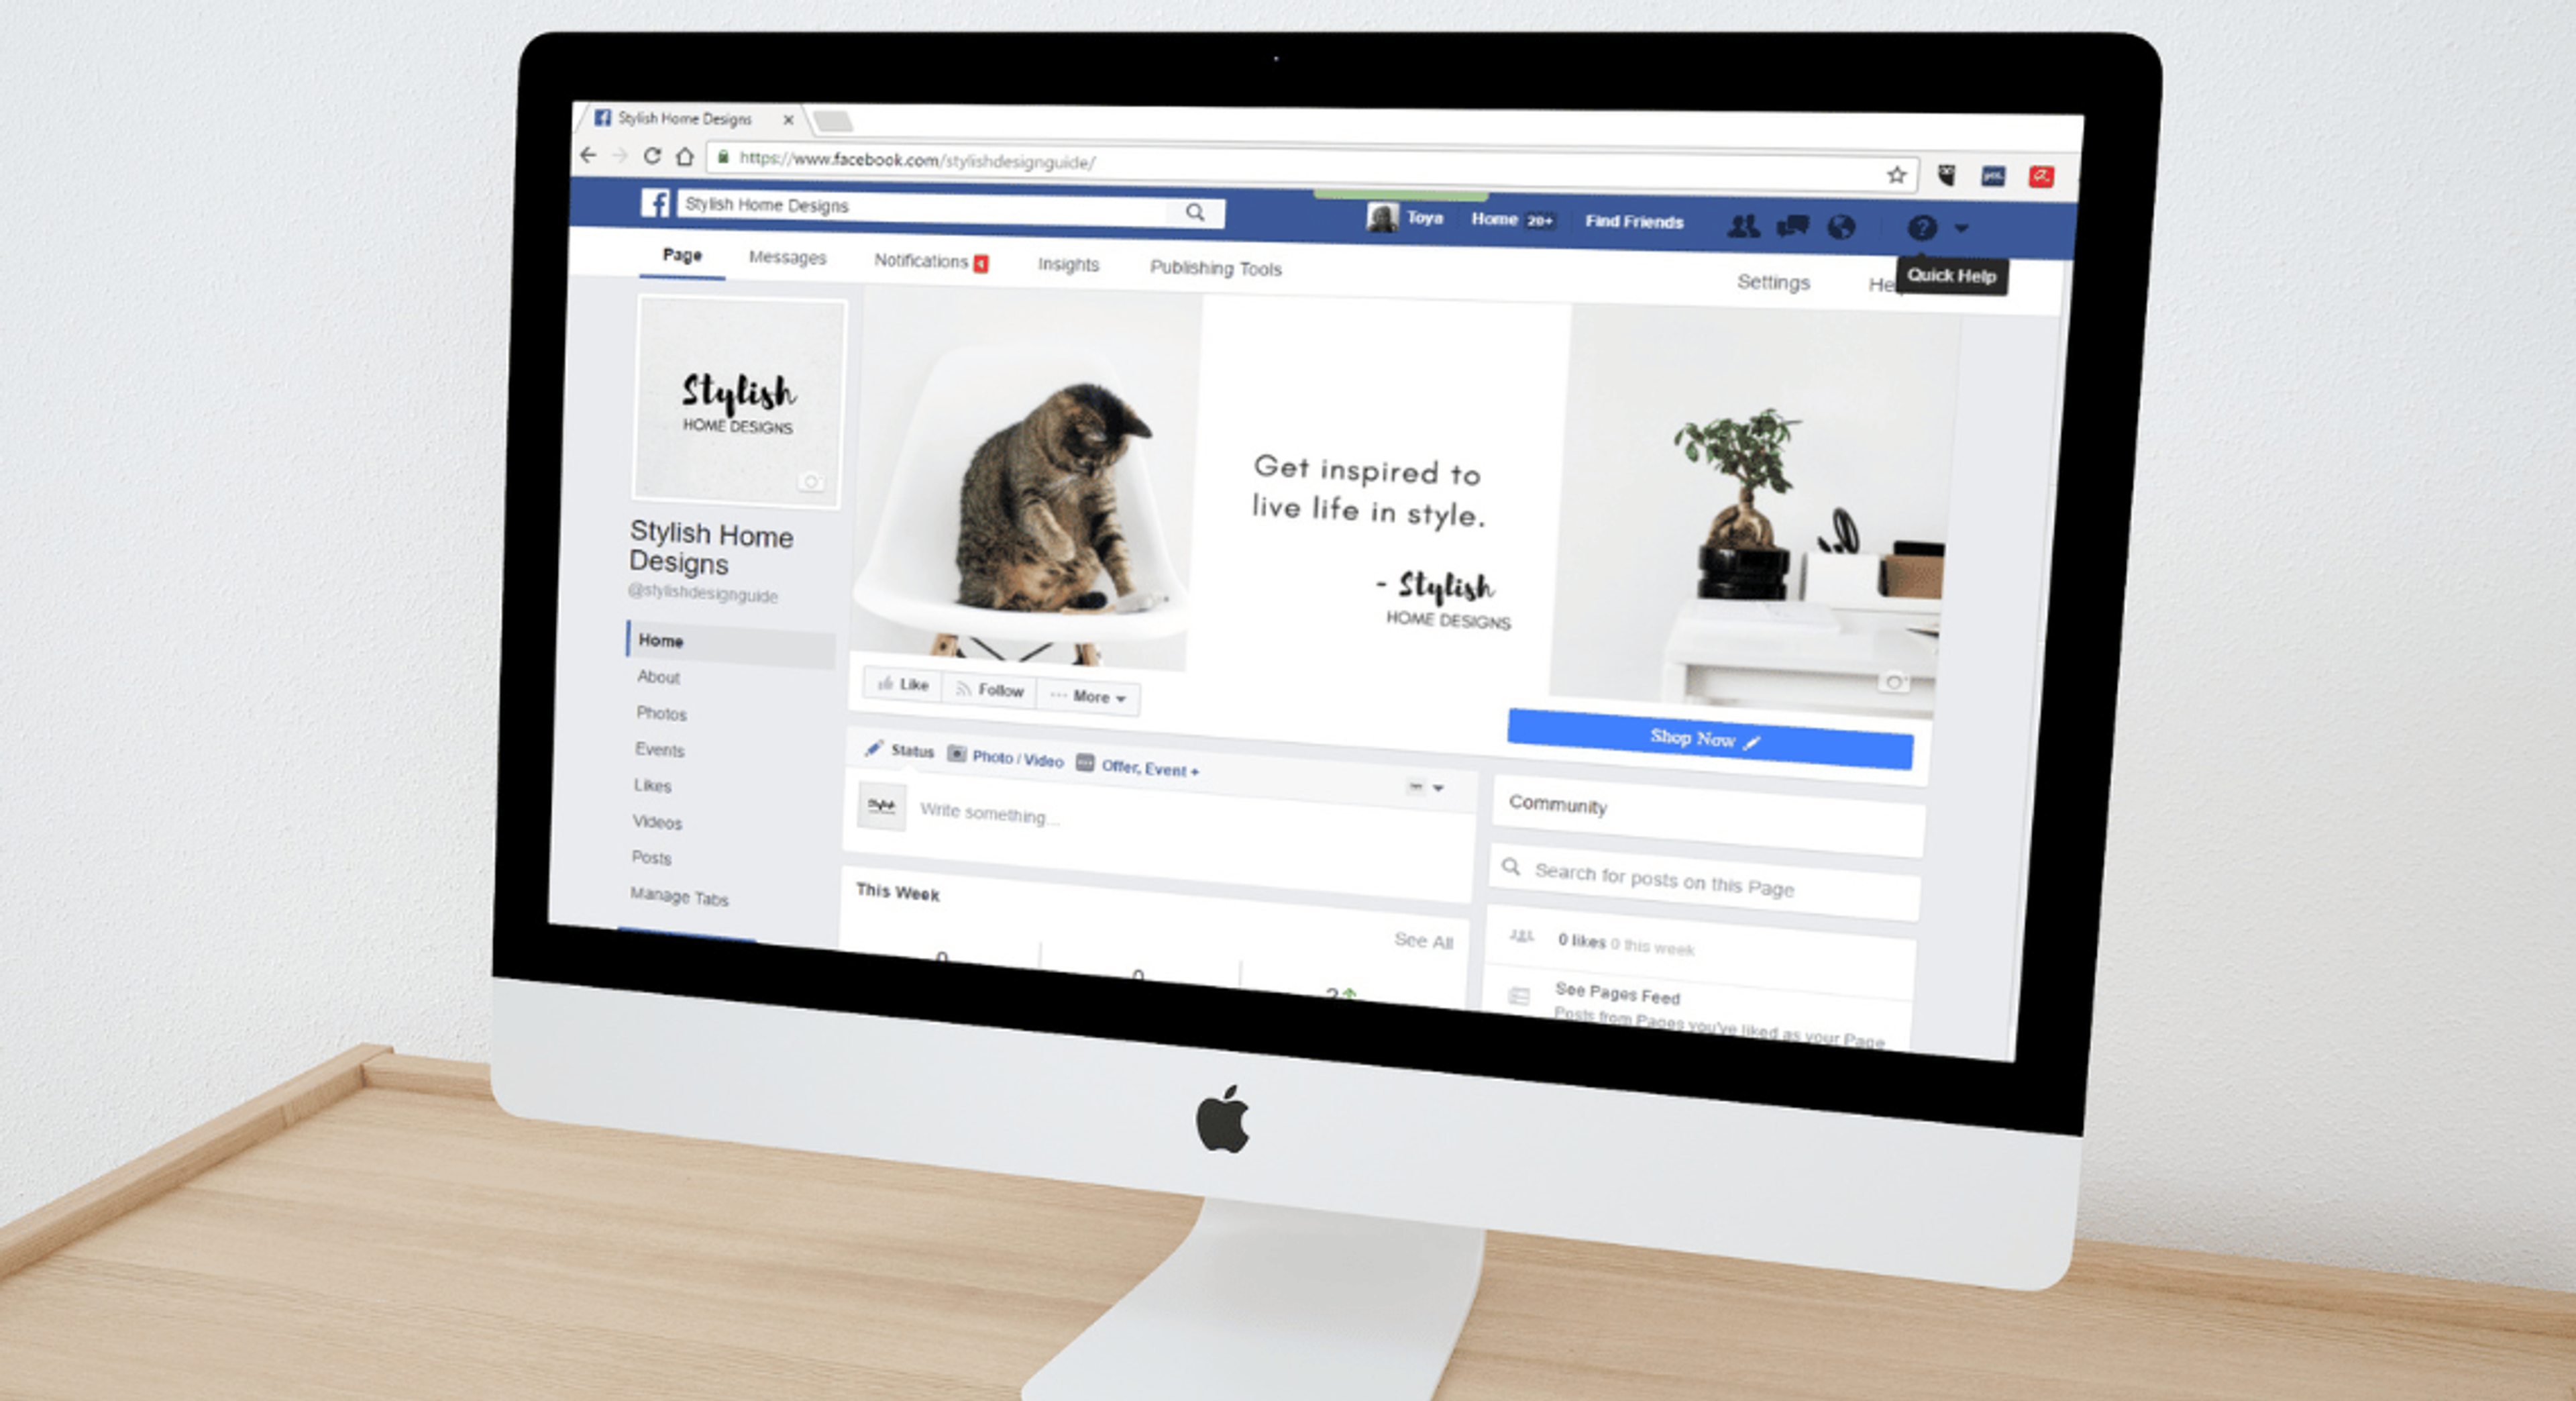 7 Steps To Set Up And Improve Your Facebook Page For Business